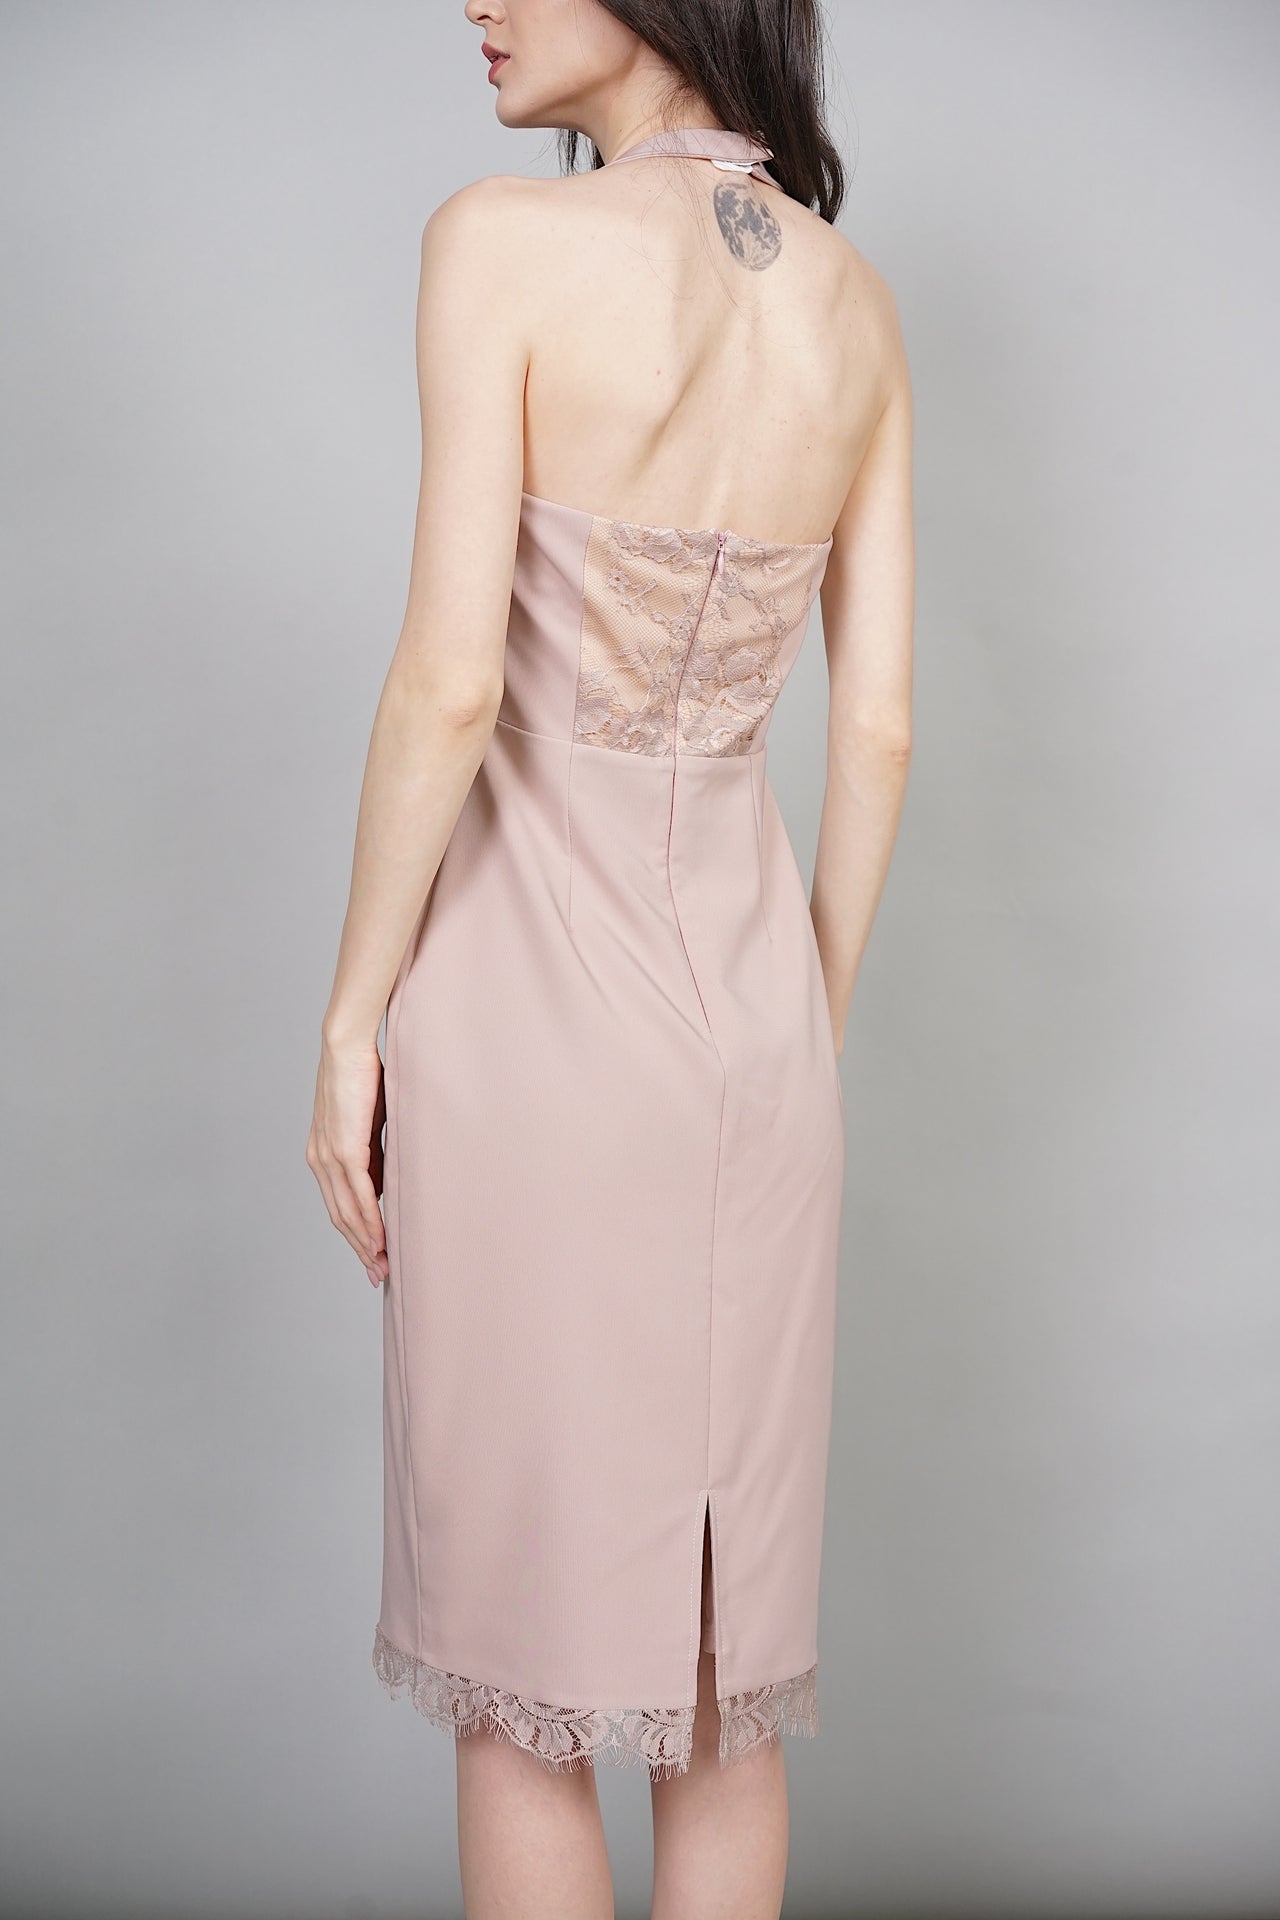 Ronda Lace-Trimmed Dress in Dusty Pink - Arriving Soon